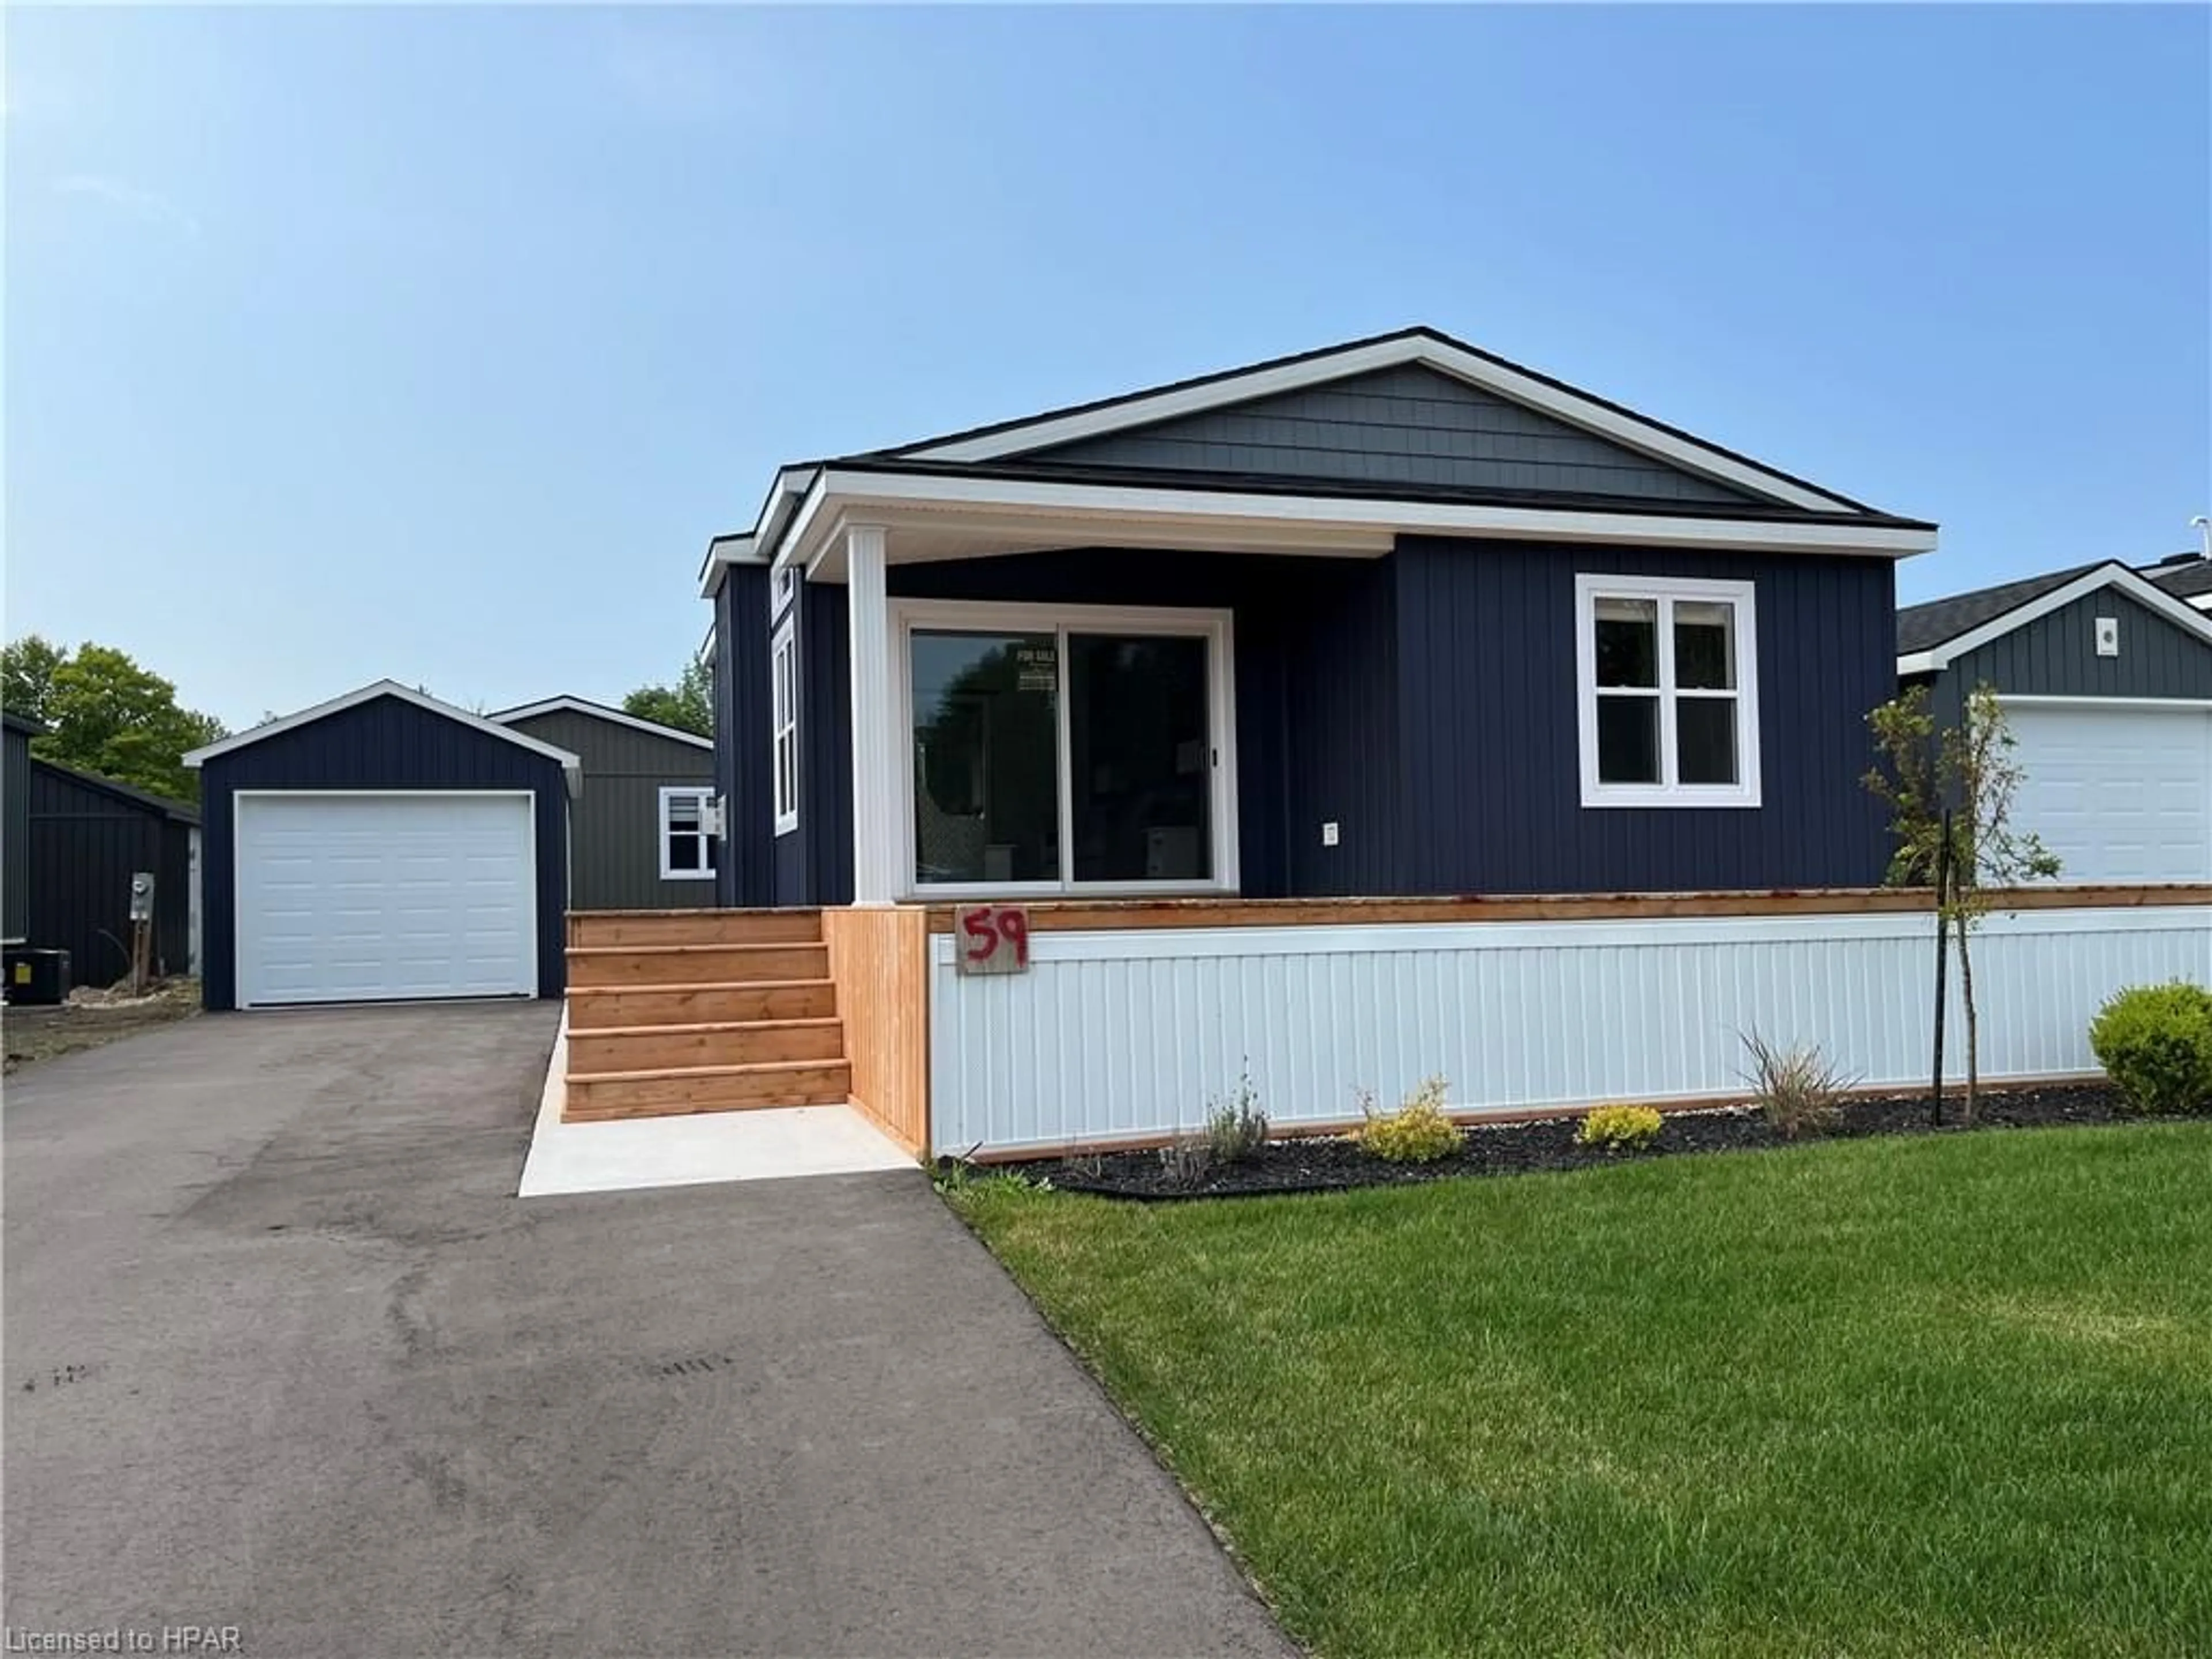 Home with vinyl exterior material for 77683 Bluewater Hwy #59, Central Huron Ontario N0M 1G0